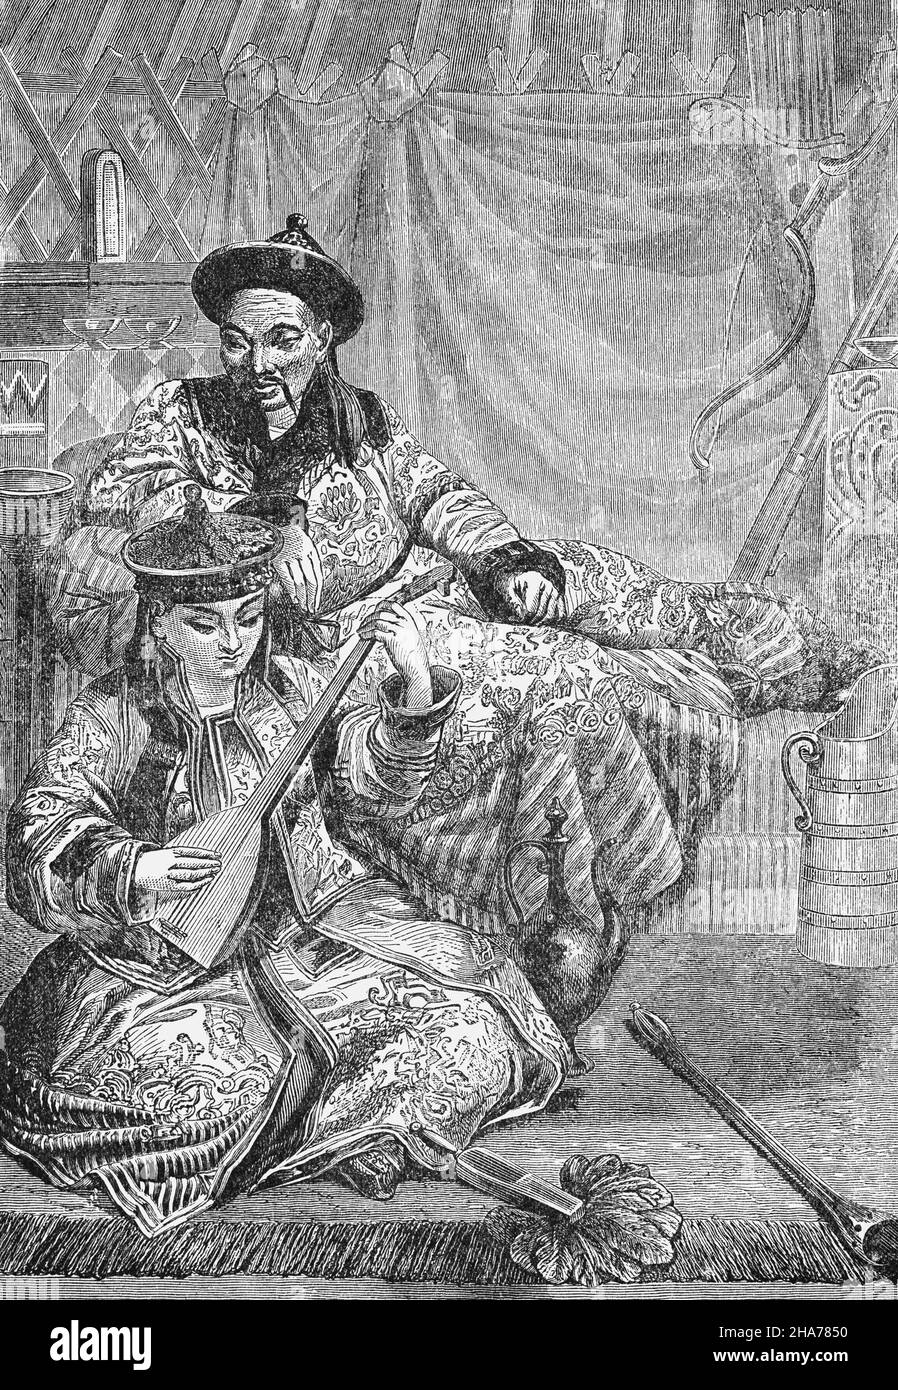 A late 19th Century illustration of a Tartar chief and his wife, playing a Balalaika. The Tartar people, are Turkic-speaking people that are mainly found in west-central Russia, with the largest group, the Volga Tatar who originated from the Volga region.  The name may have been coined in the 5th century by nomadic Mongolic-speakers in the Tatar confederation. The name was used to refer to the population of the former Golden Hordes in Europe such as the Crimean, Kazan, Siberian Khanates, and Astrakhan. Stock Photo